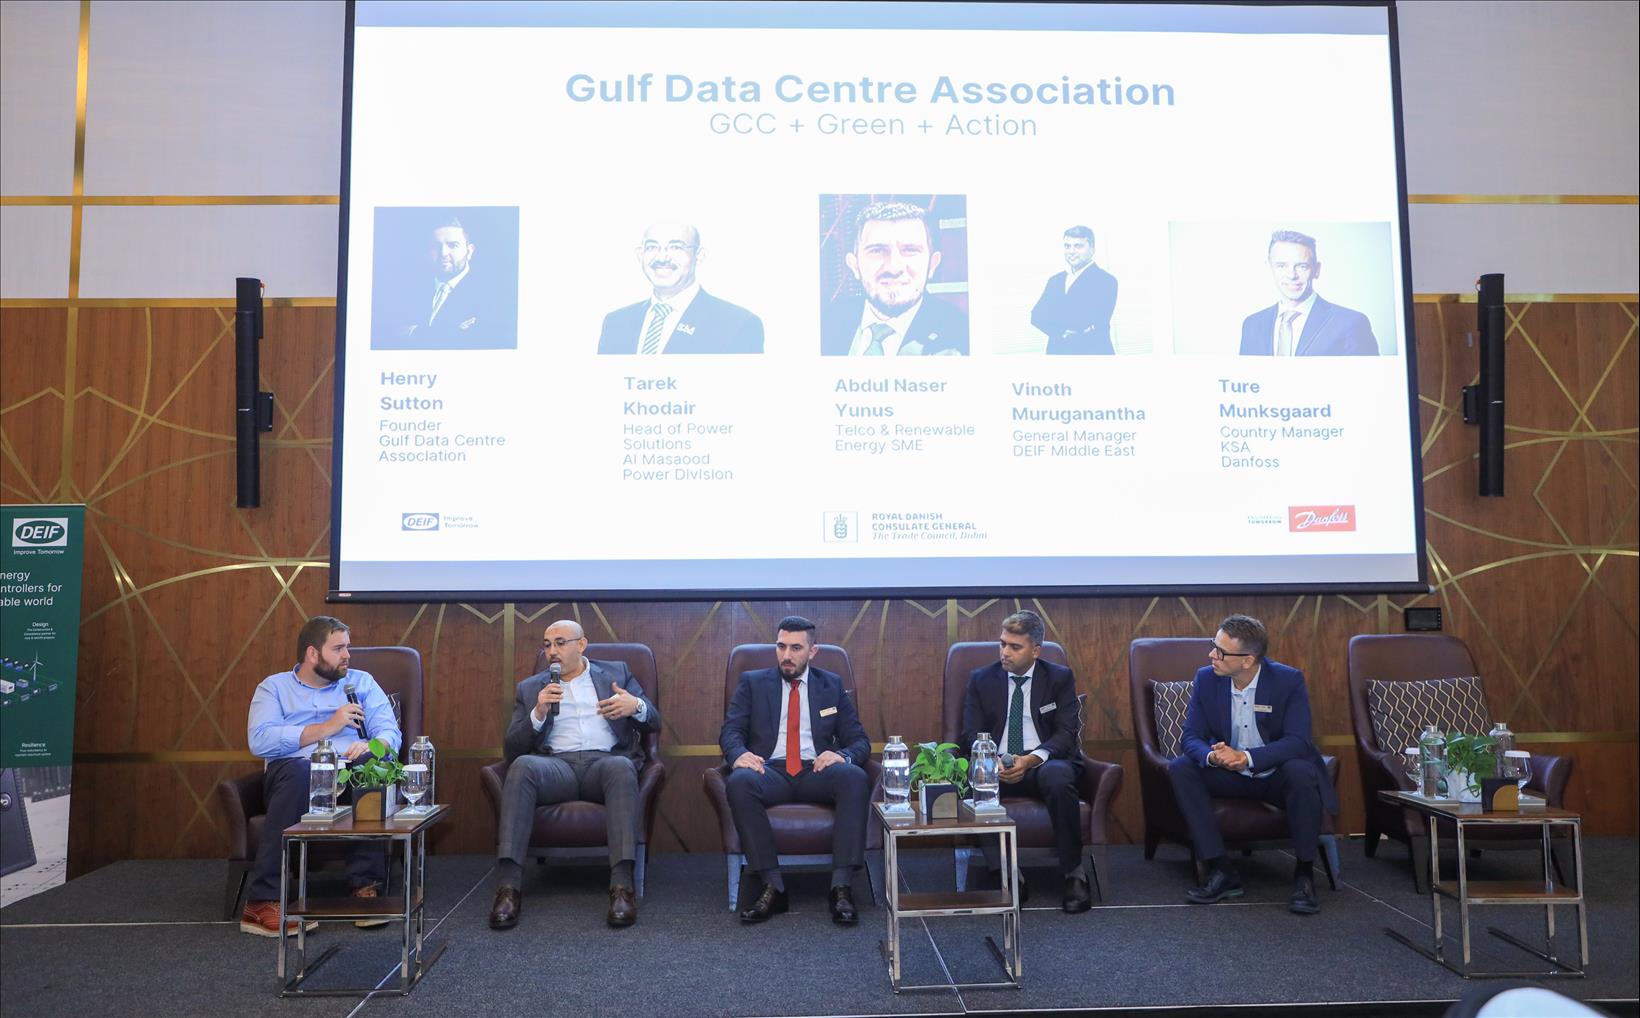 Danfoss And DEIF Gather Top Regional Data Center Experts To Discuss Sustainable Data Center Solutions